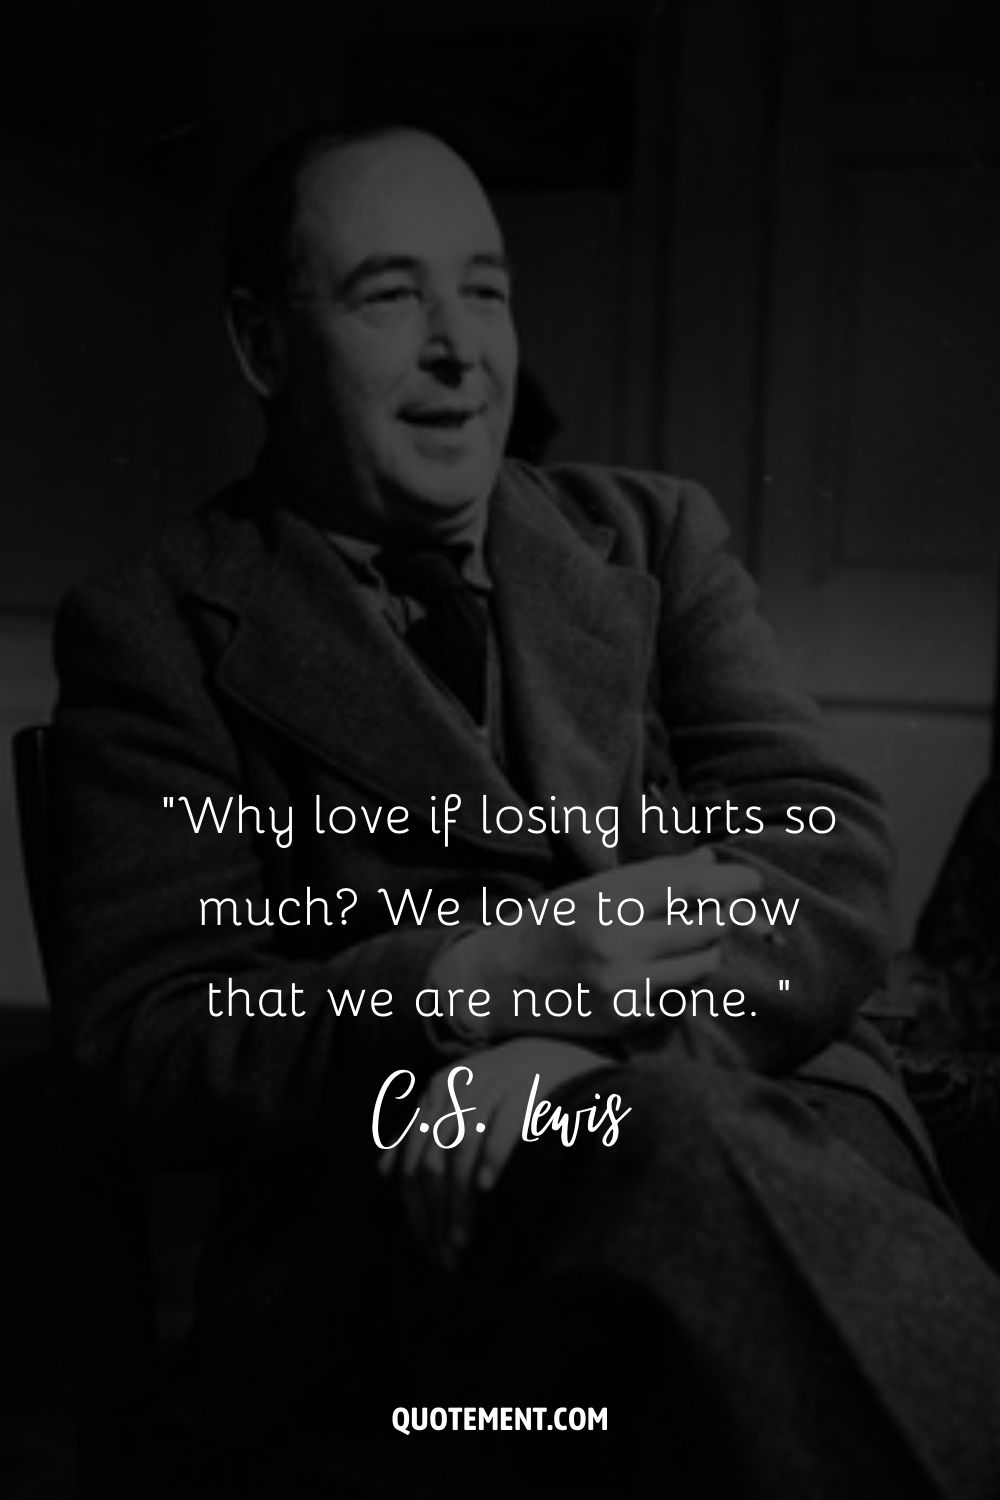 C.S. Lewis sits with a content smile